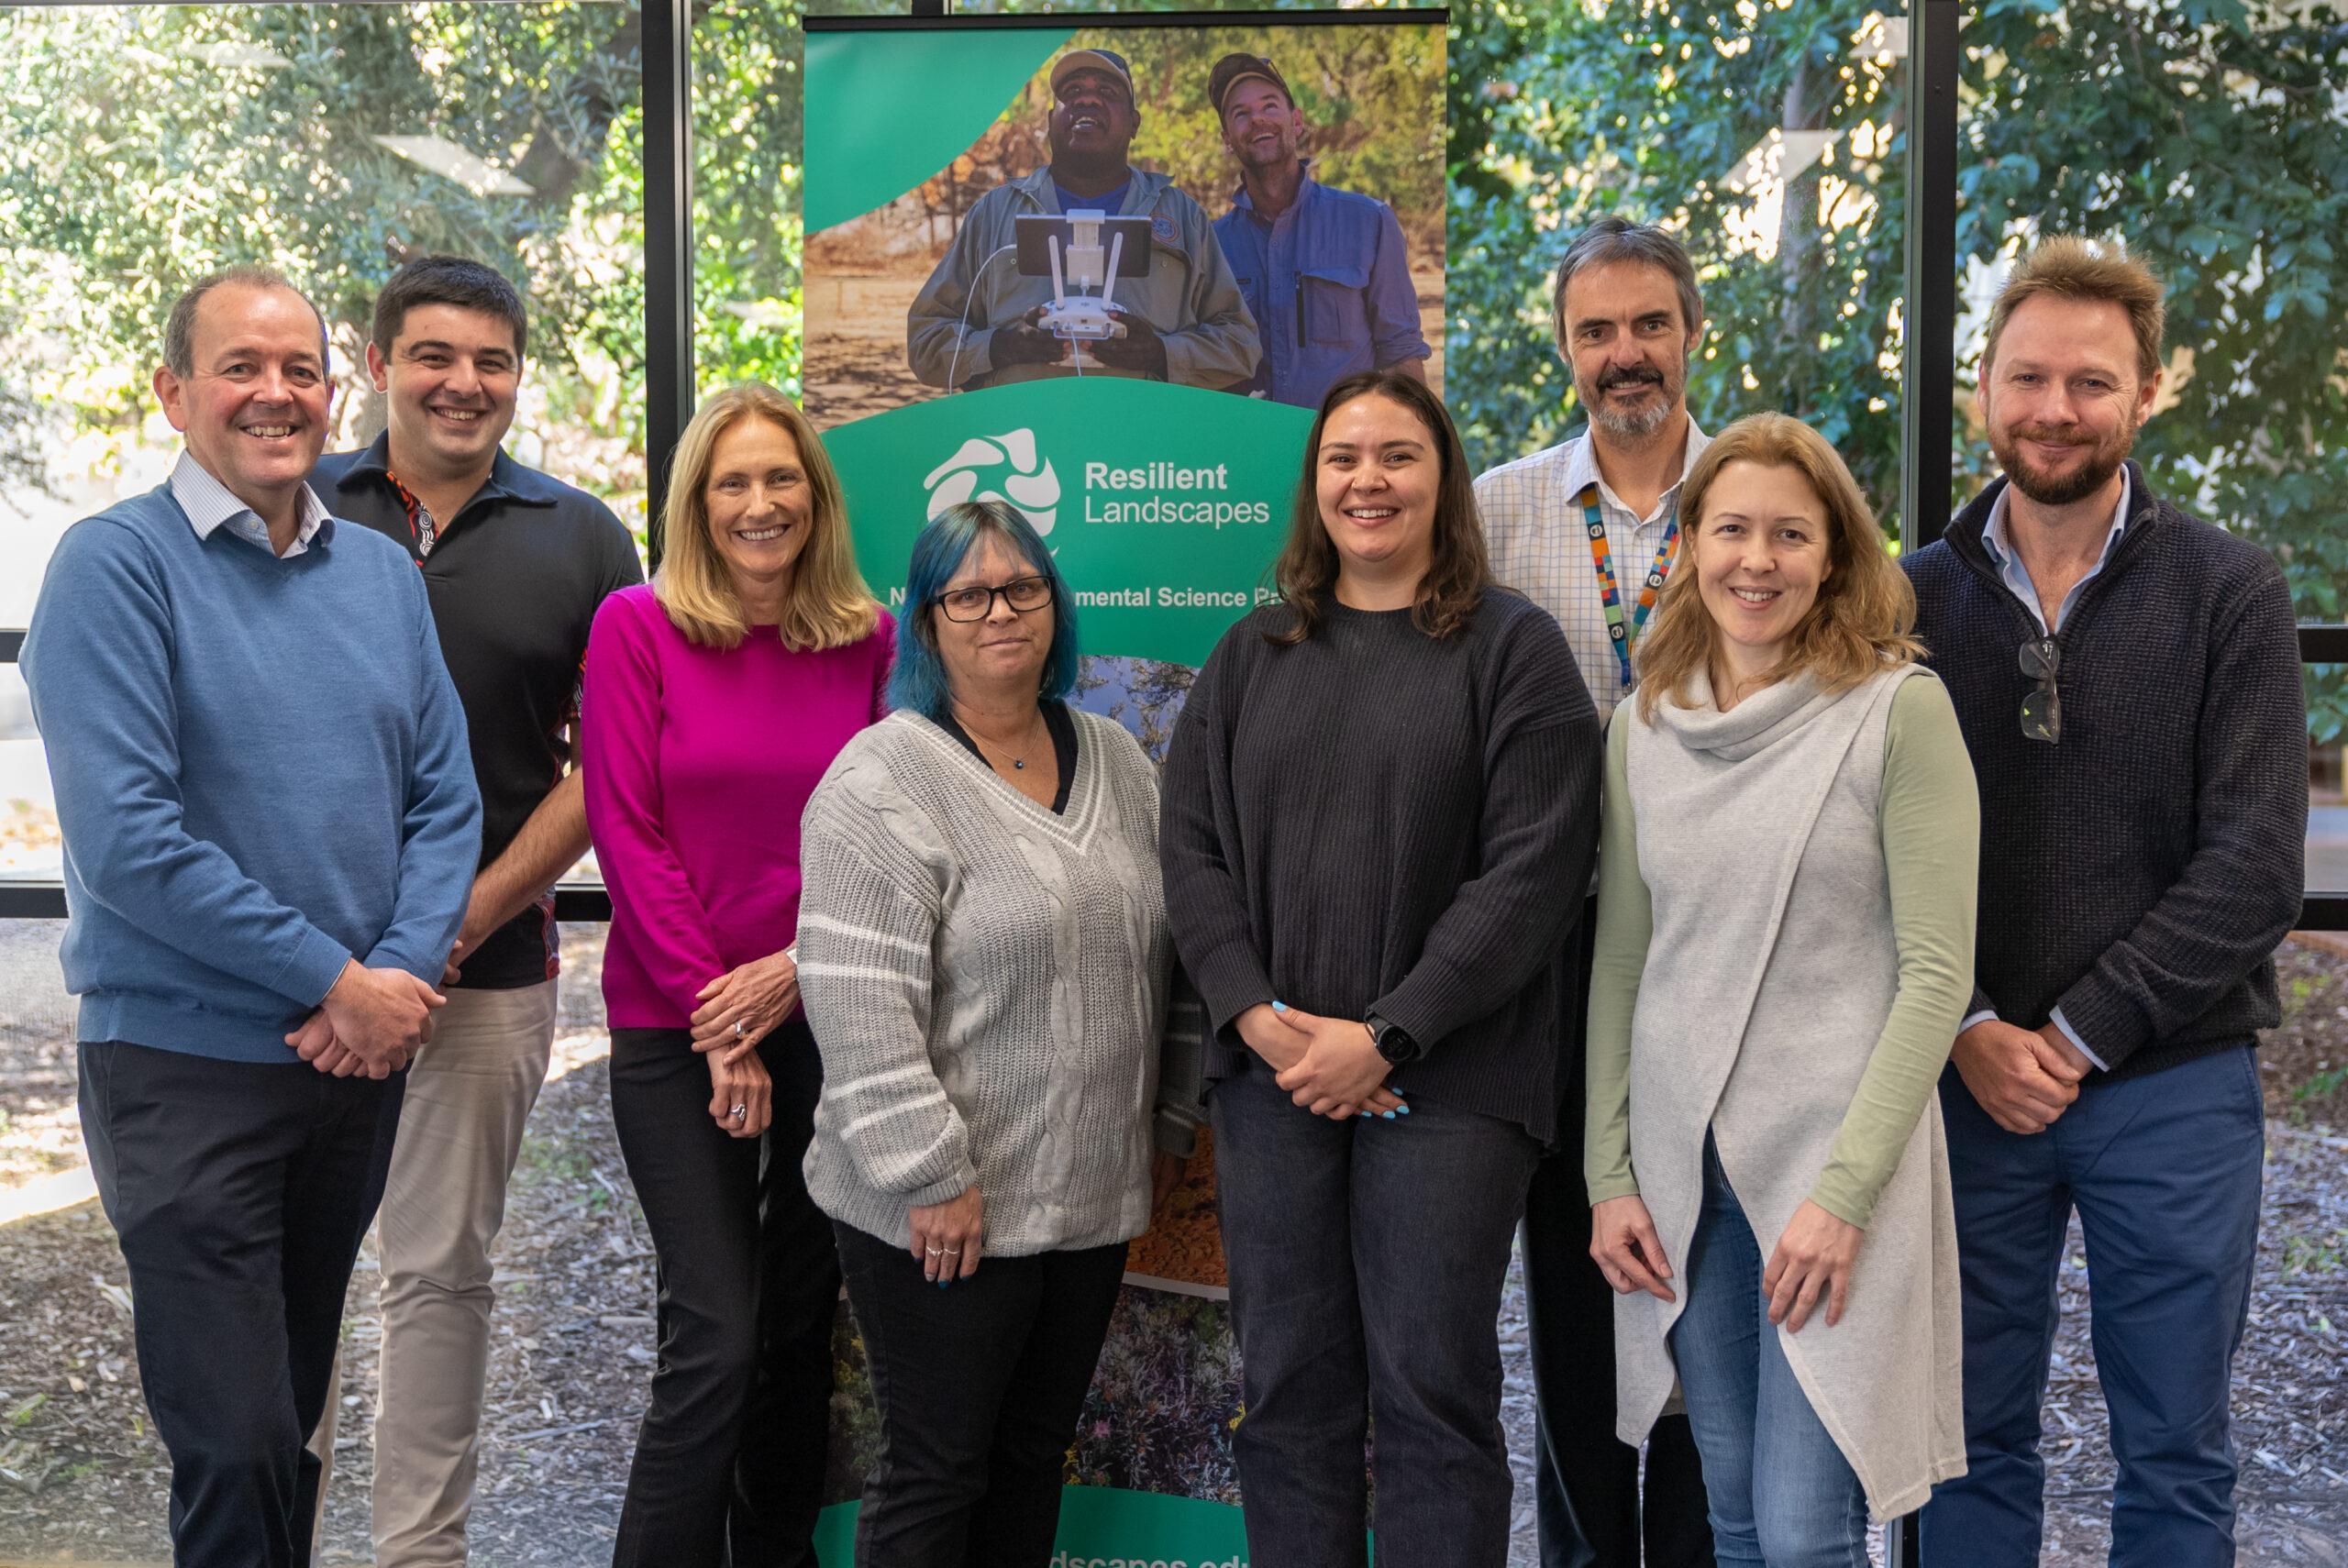 (Left to right) Professor Michael Douglas (NESP Resilient Landscapes Hub, Hub Leader), Oliver Tester (NESP Resilient Landscapes Hub, Indigenous Research Facilitator), Professor Samantha Setterfield (NESP Resilient Landscapes Hub, Western Node Leader), Shandell Cummings, Lenore Morris, Dr Brett Molony (Science Director, CSIRO ), Dr Laila Simpson (Associate Director of Research Operations, Office of Research, UWA), Associate Professor Matt Hipsey (UWA School of Agriculture and Environment). Photo: UWA Media.